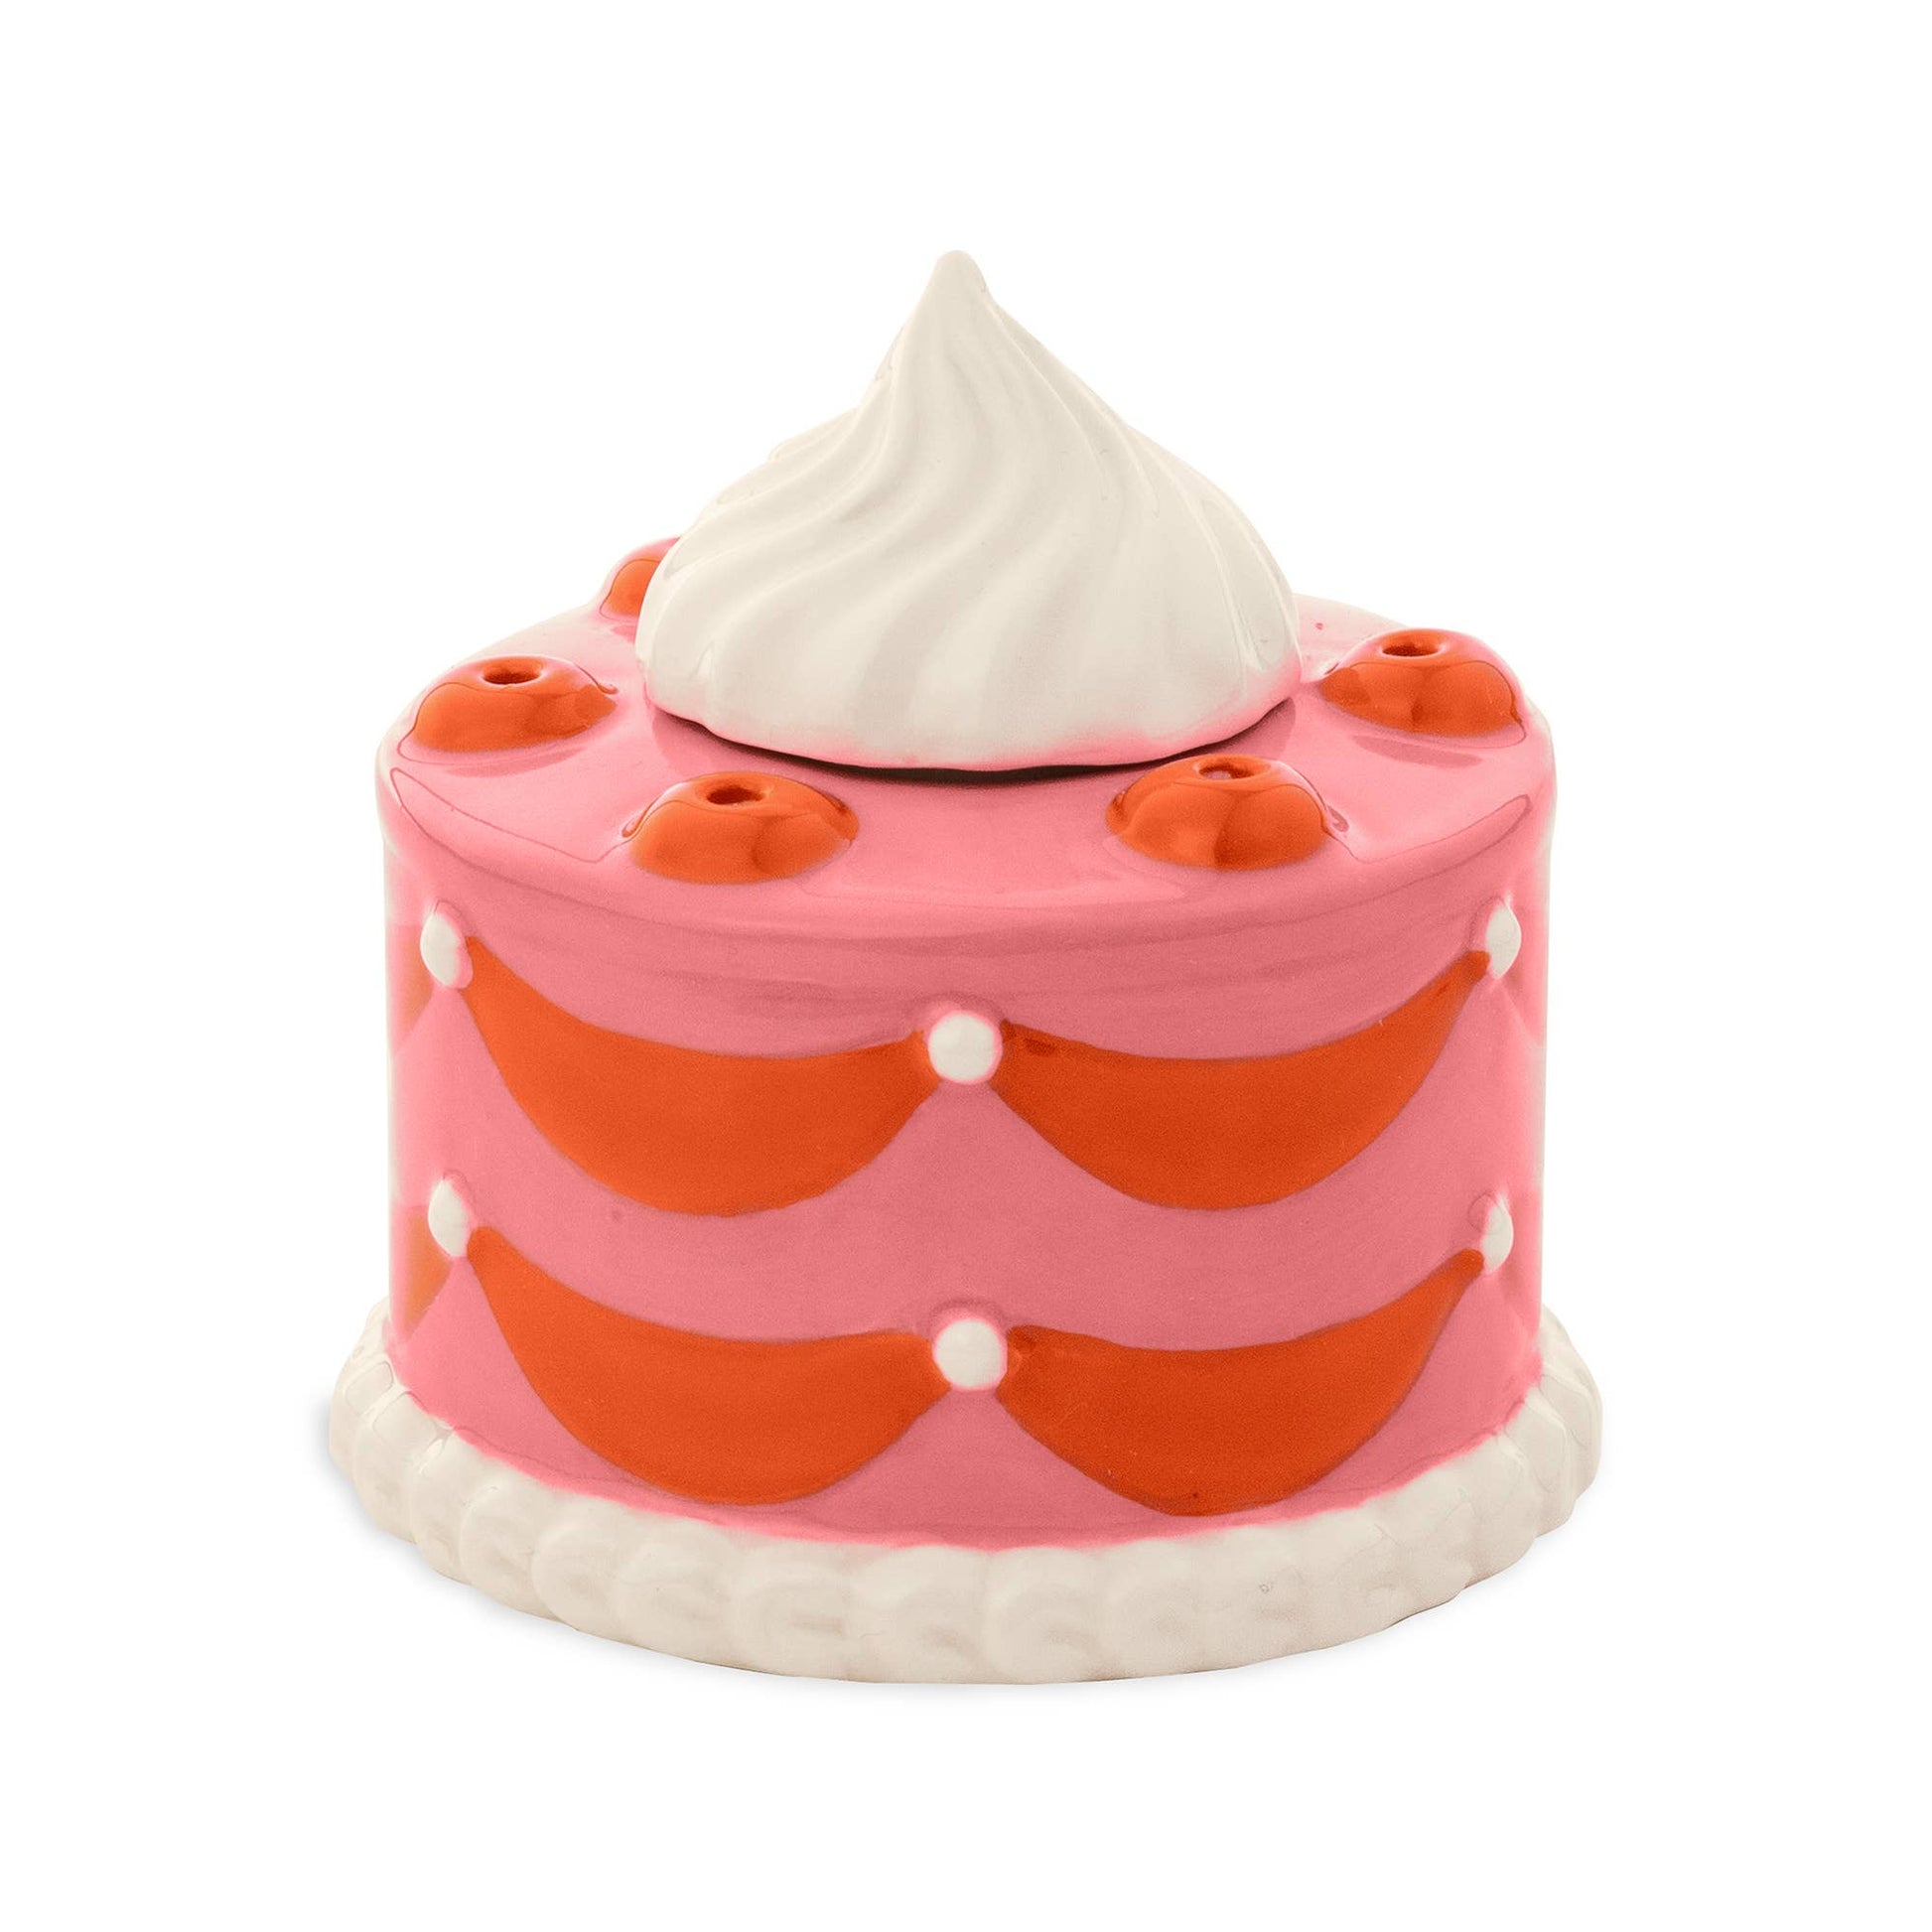 Ceramic cake match holder and striker --shaped like a whole, round cake and painted red and pink. Has a dollop of whipped cream on top